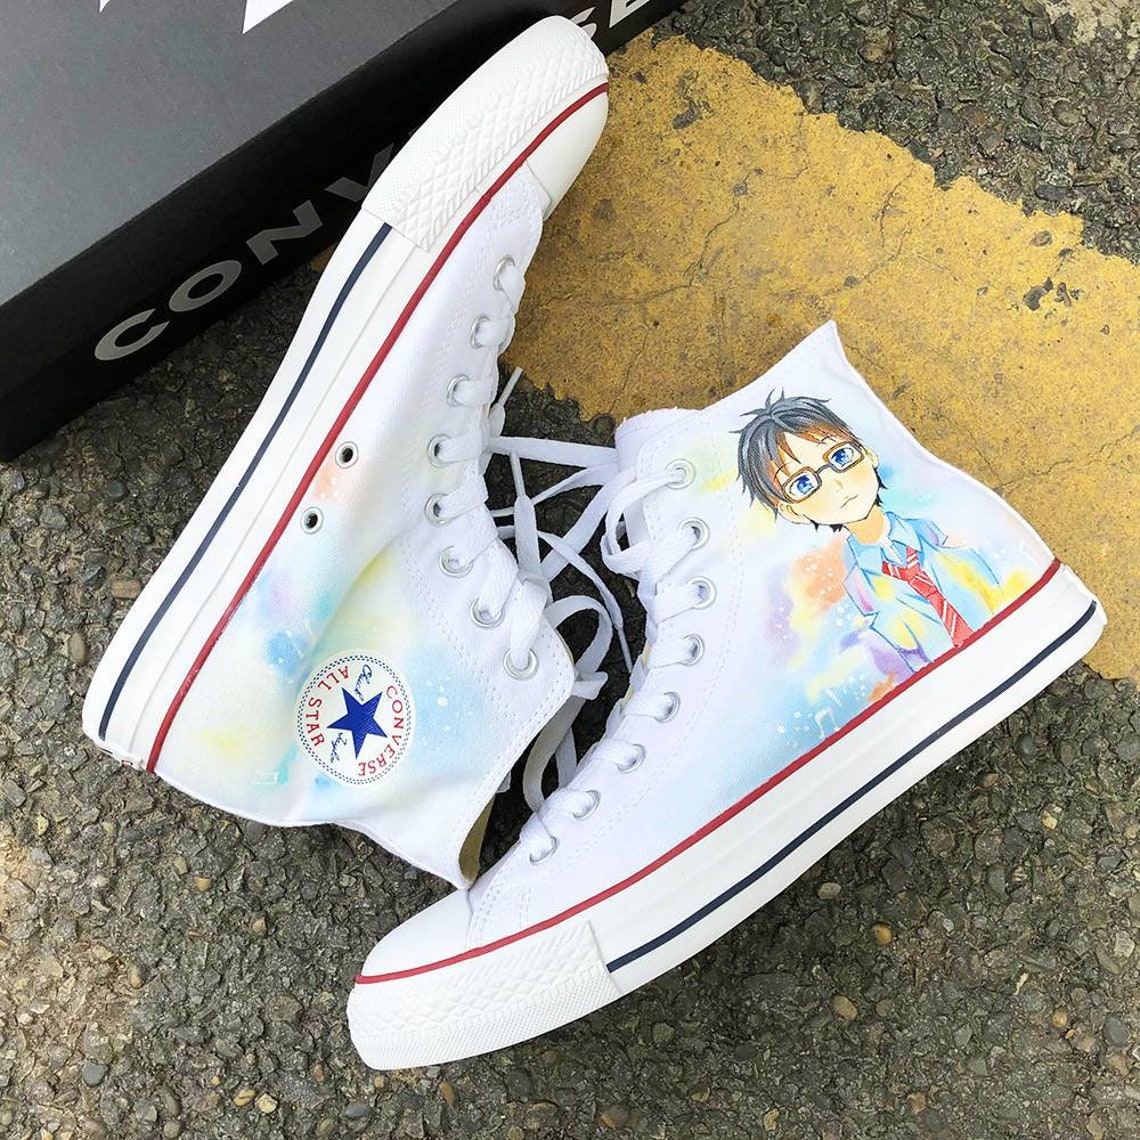 Personalized Handpainted Anime Shoes Your Lie in April | Etsy